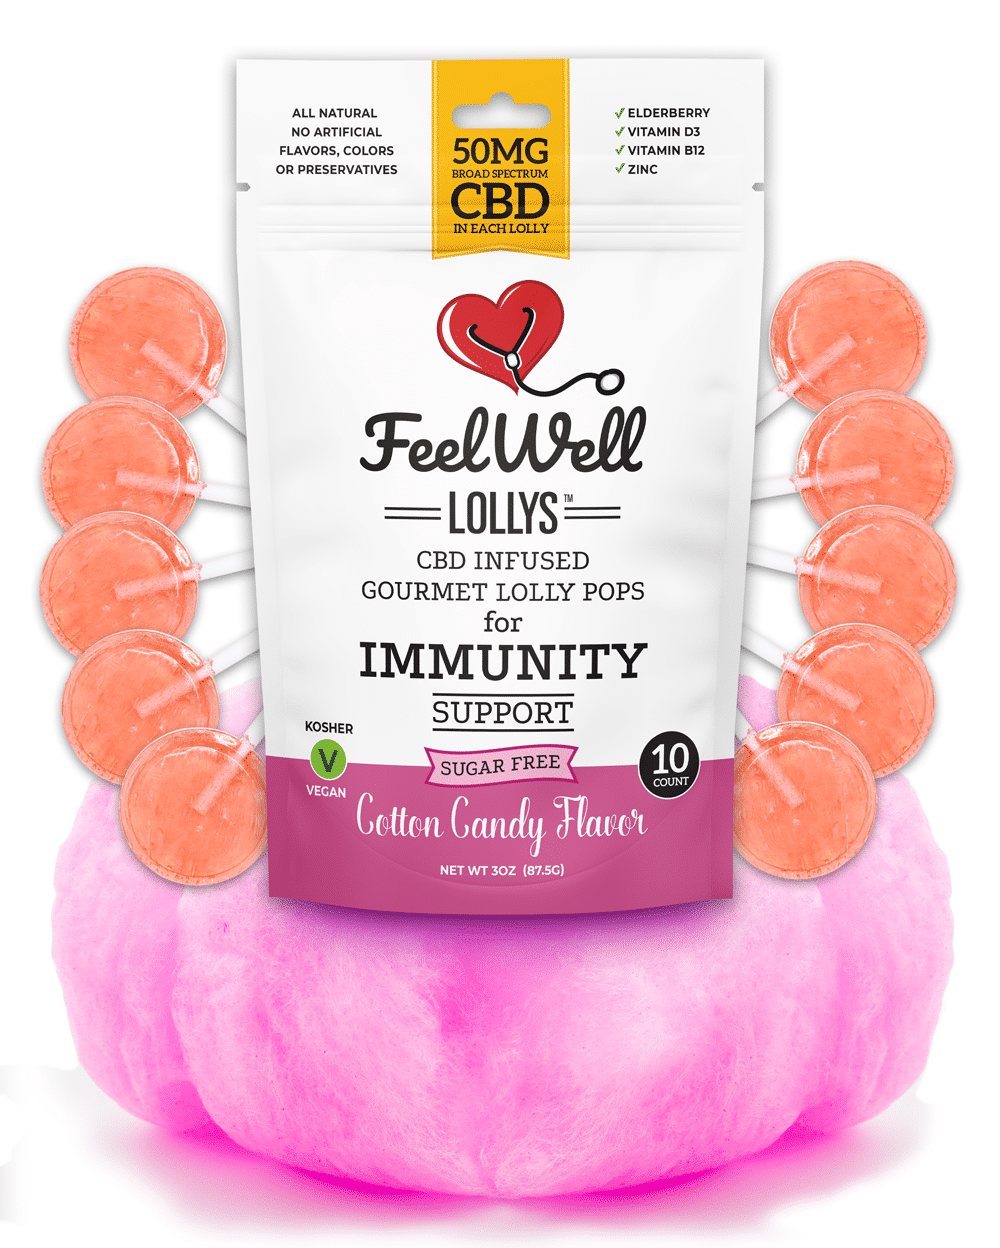 Feel Well Lollys Cotton Candy